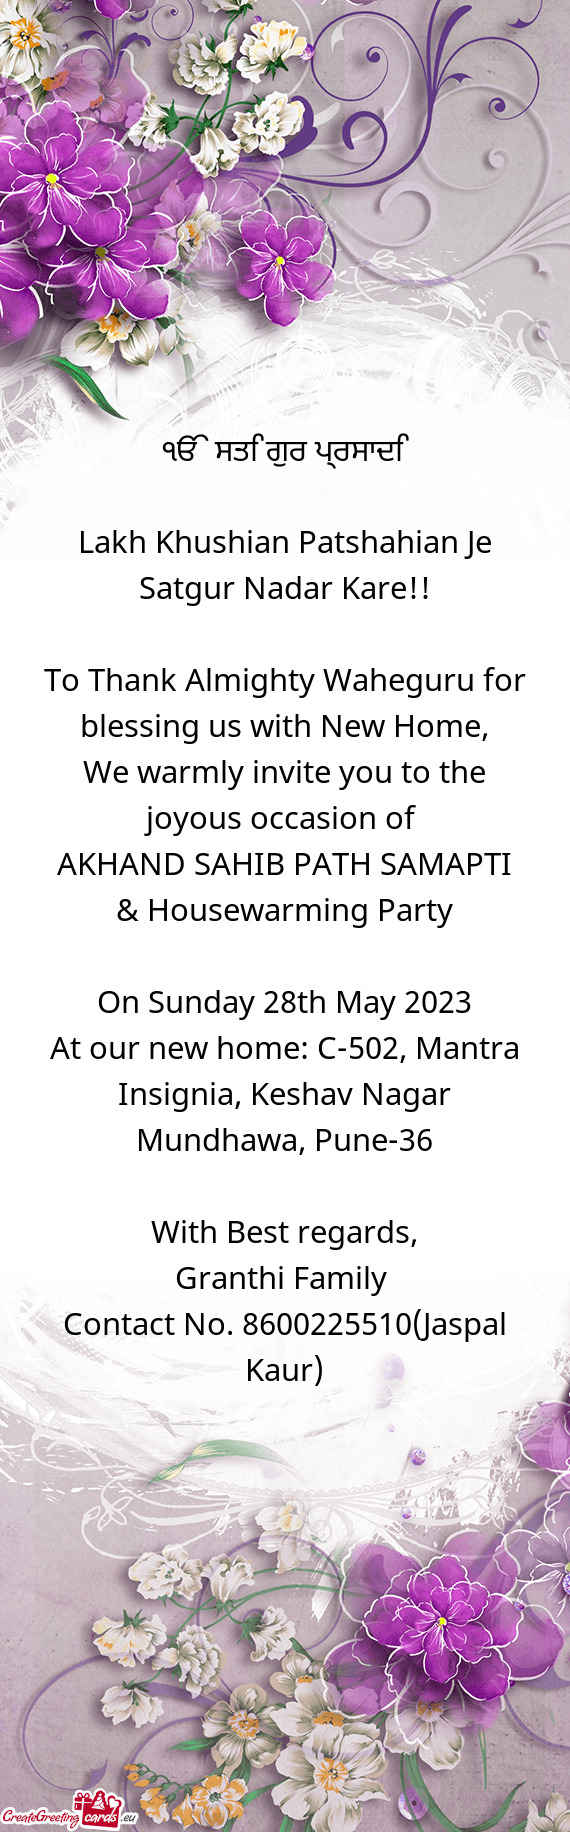 To Thank Almighty Waheguru for blessing us with New Home